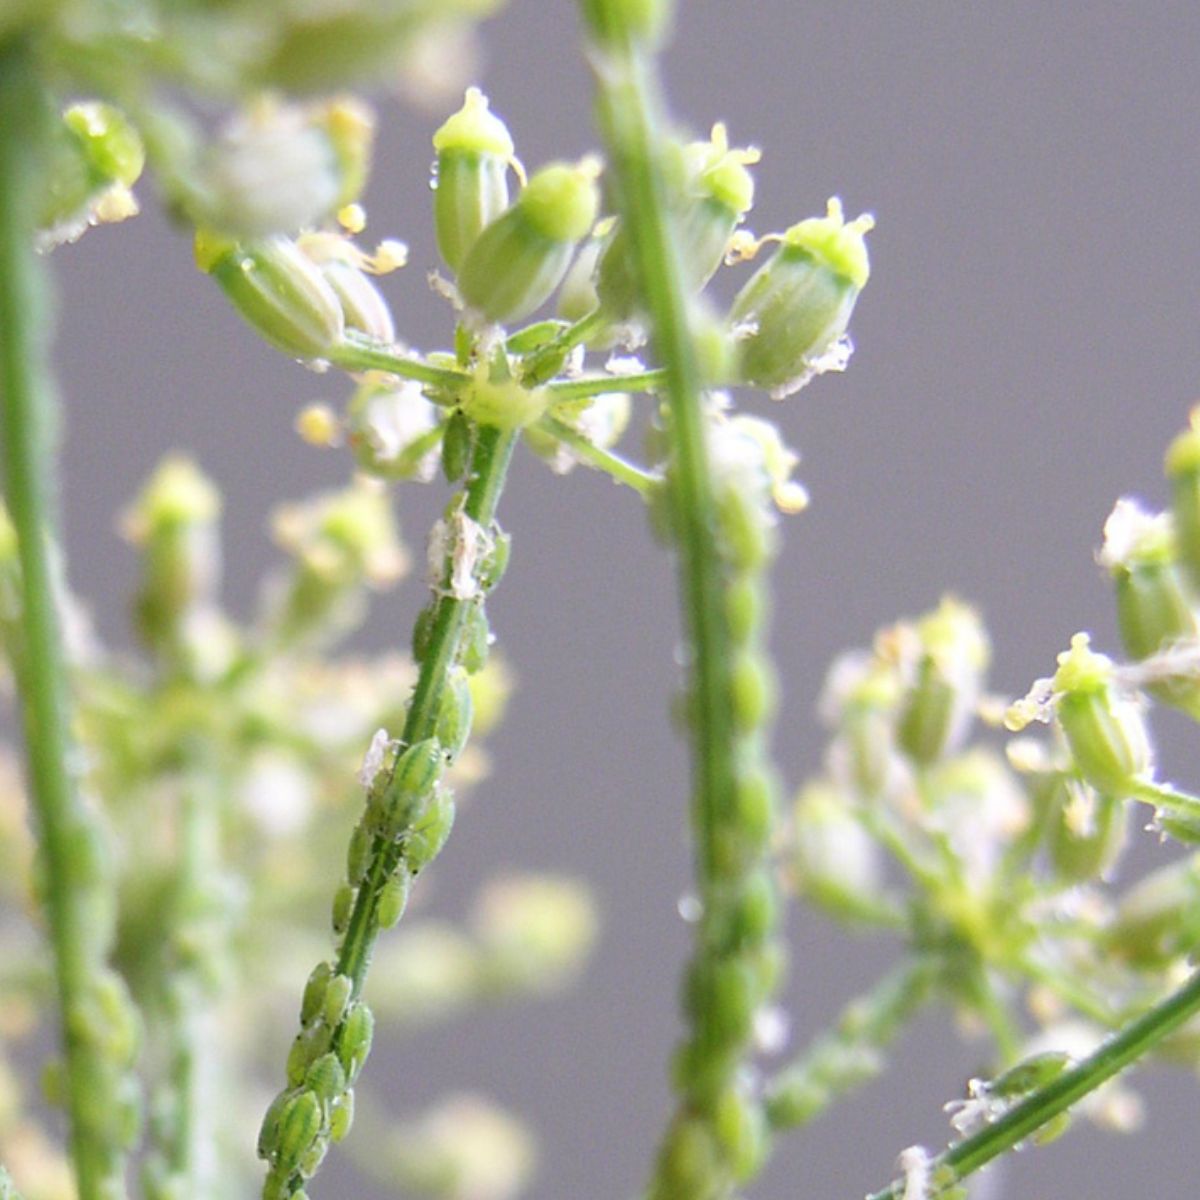 aphids on herb flowers